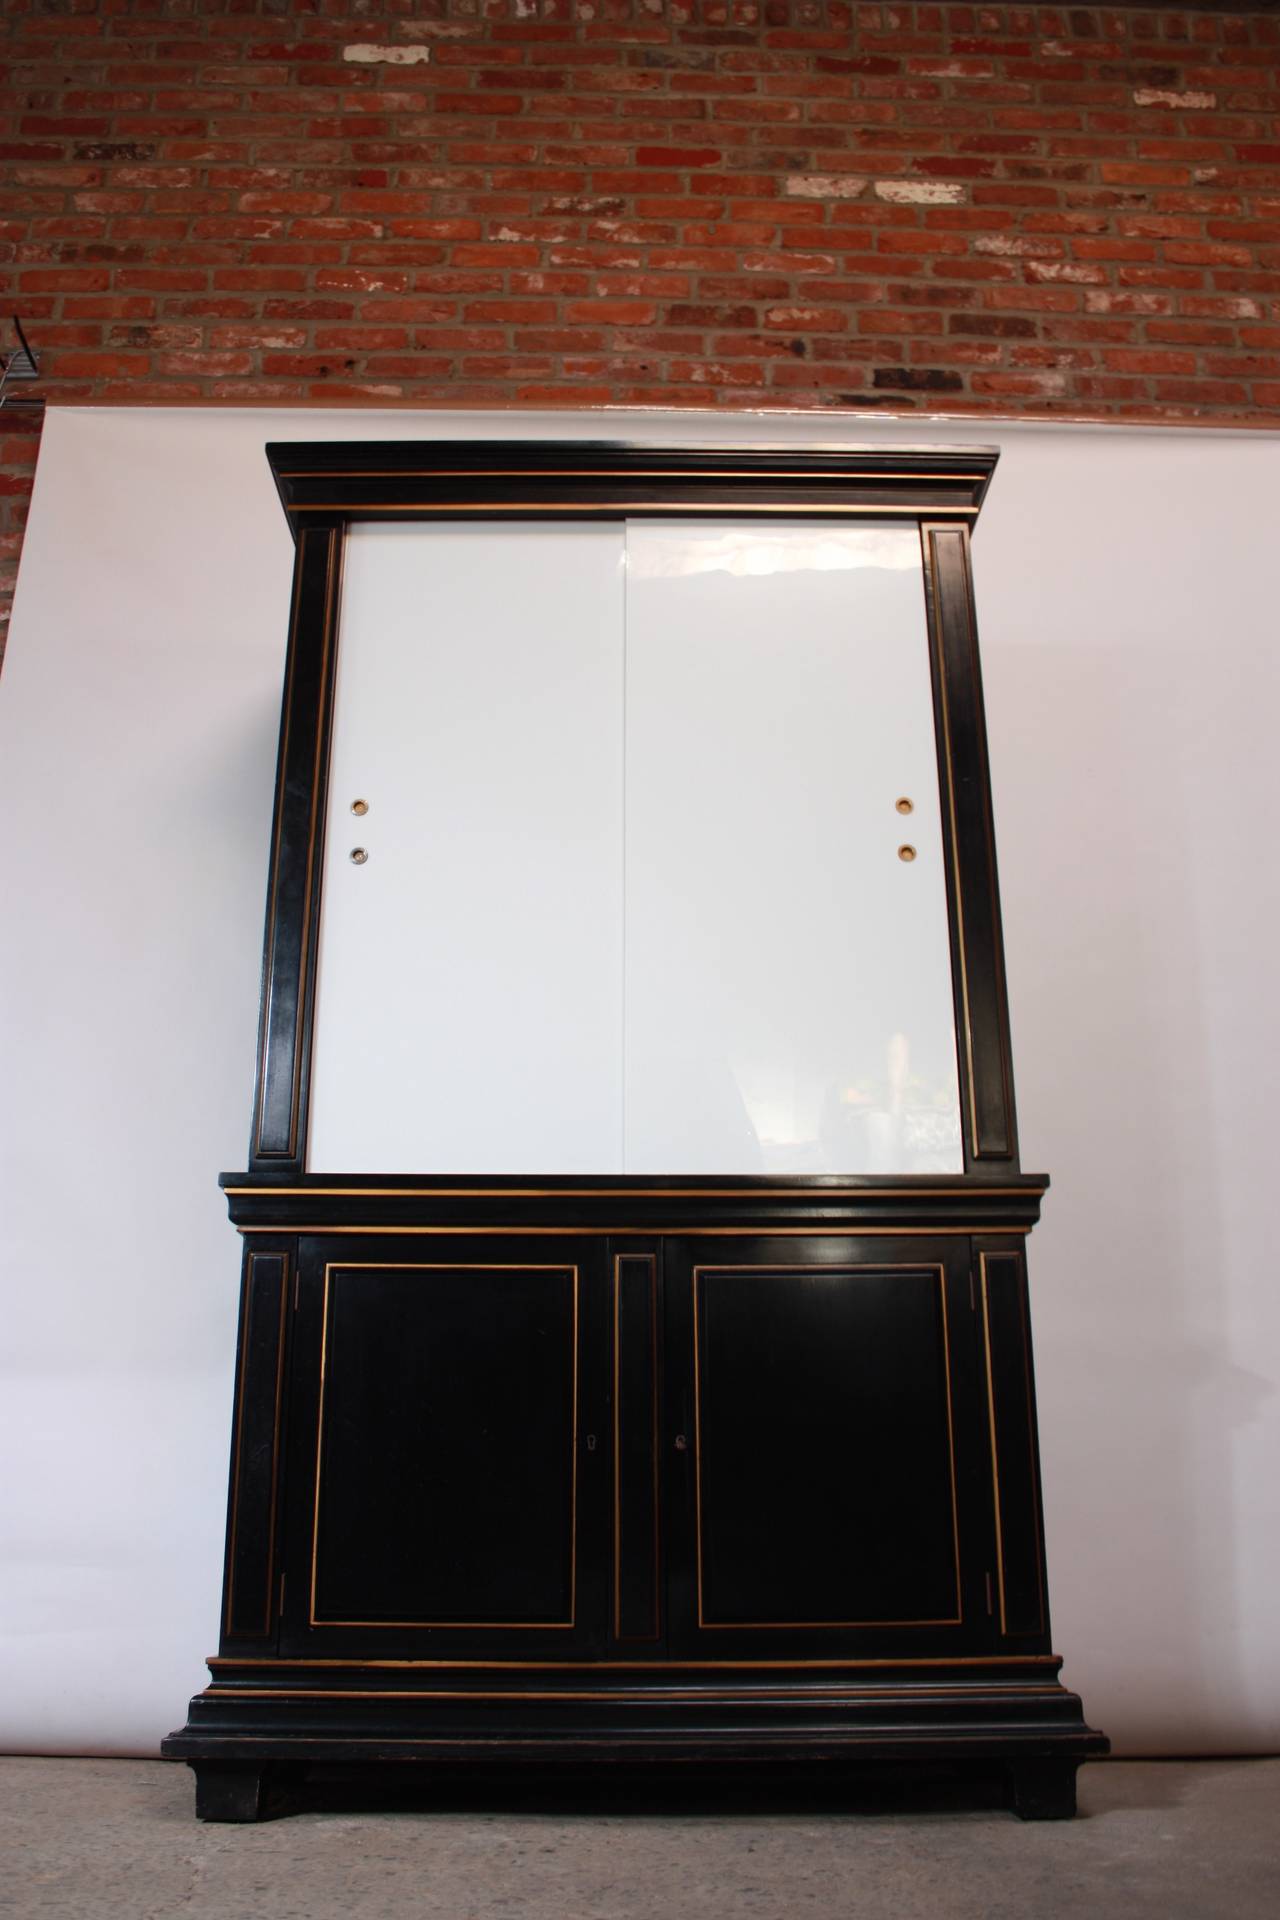 This majestic armoire in the style of James Mont features two sliding milk glass doors, a black lacquered frame, three adjustable shelves on the top, and one built-in shelf on the bottom. The two bottom doors open to reveal the one built-in shelf,